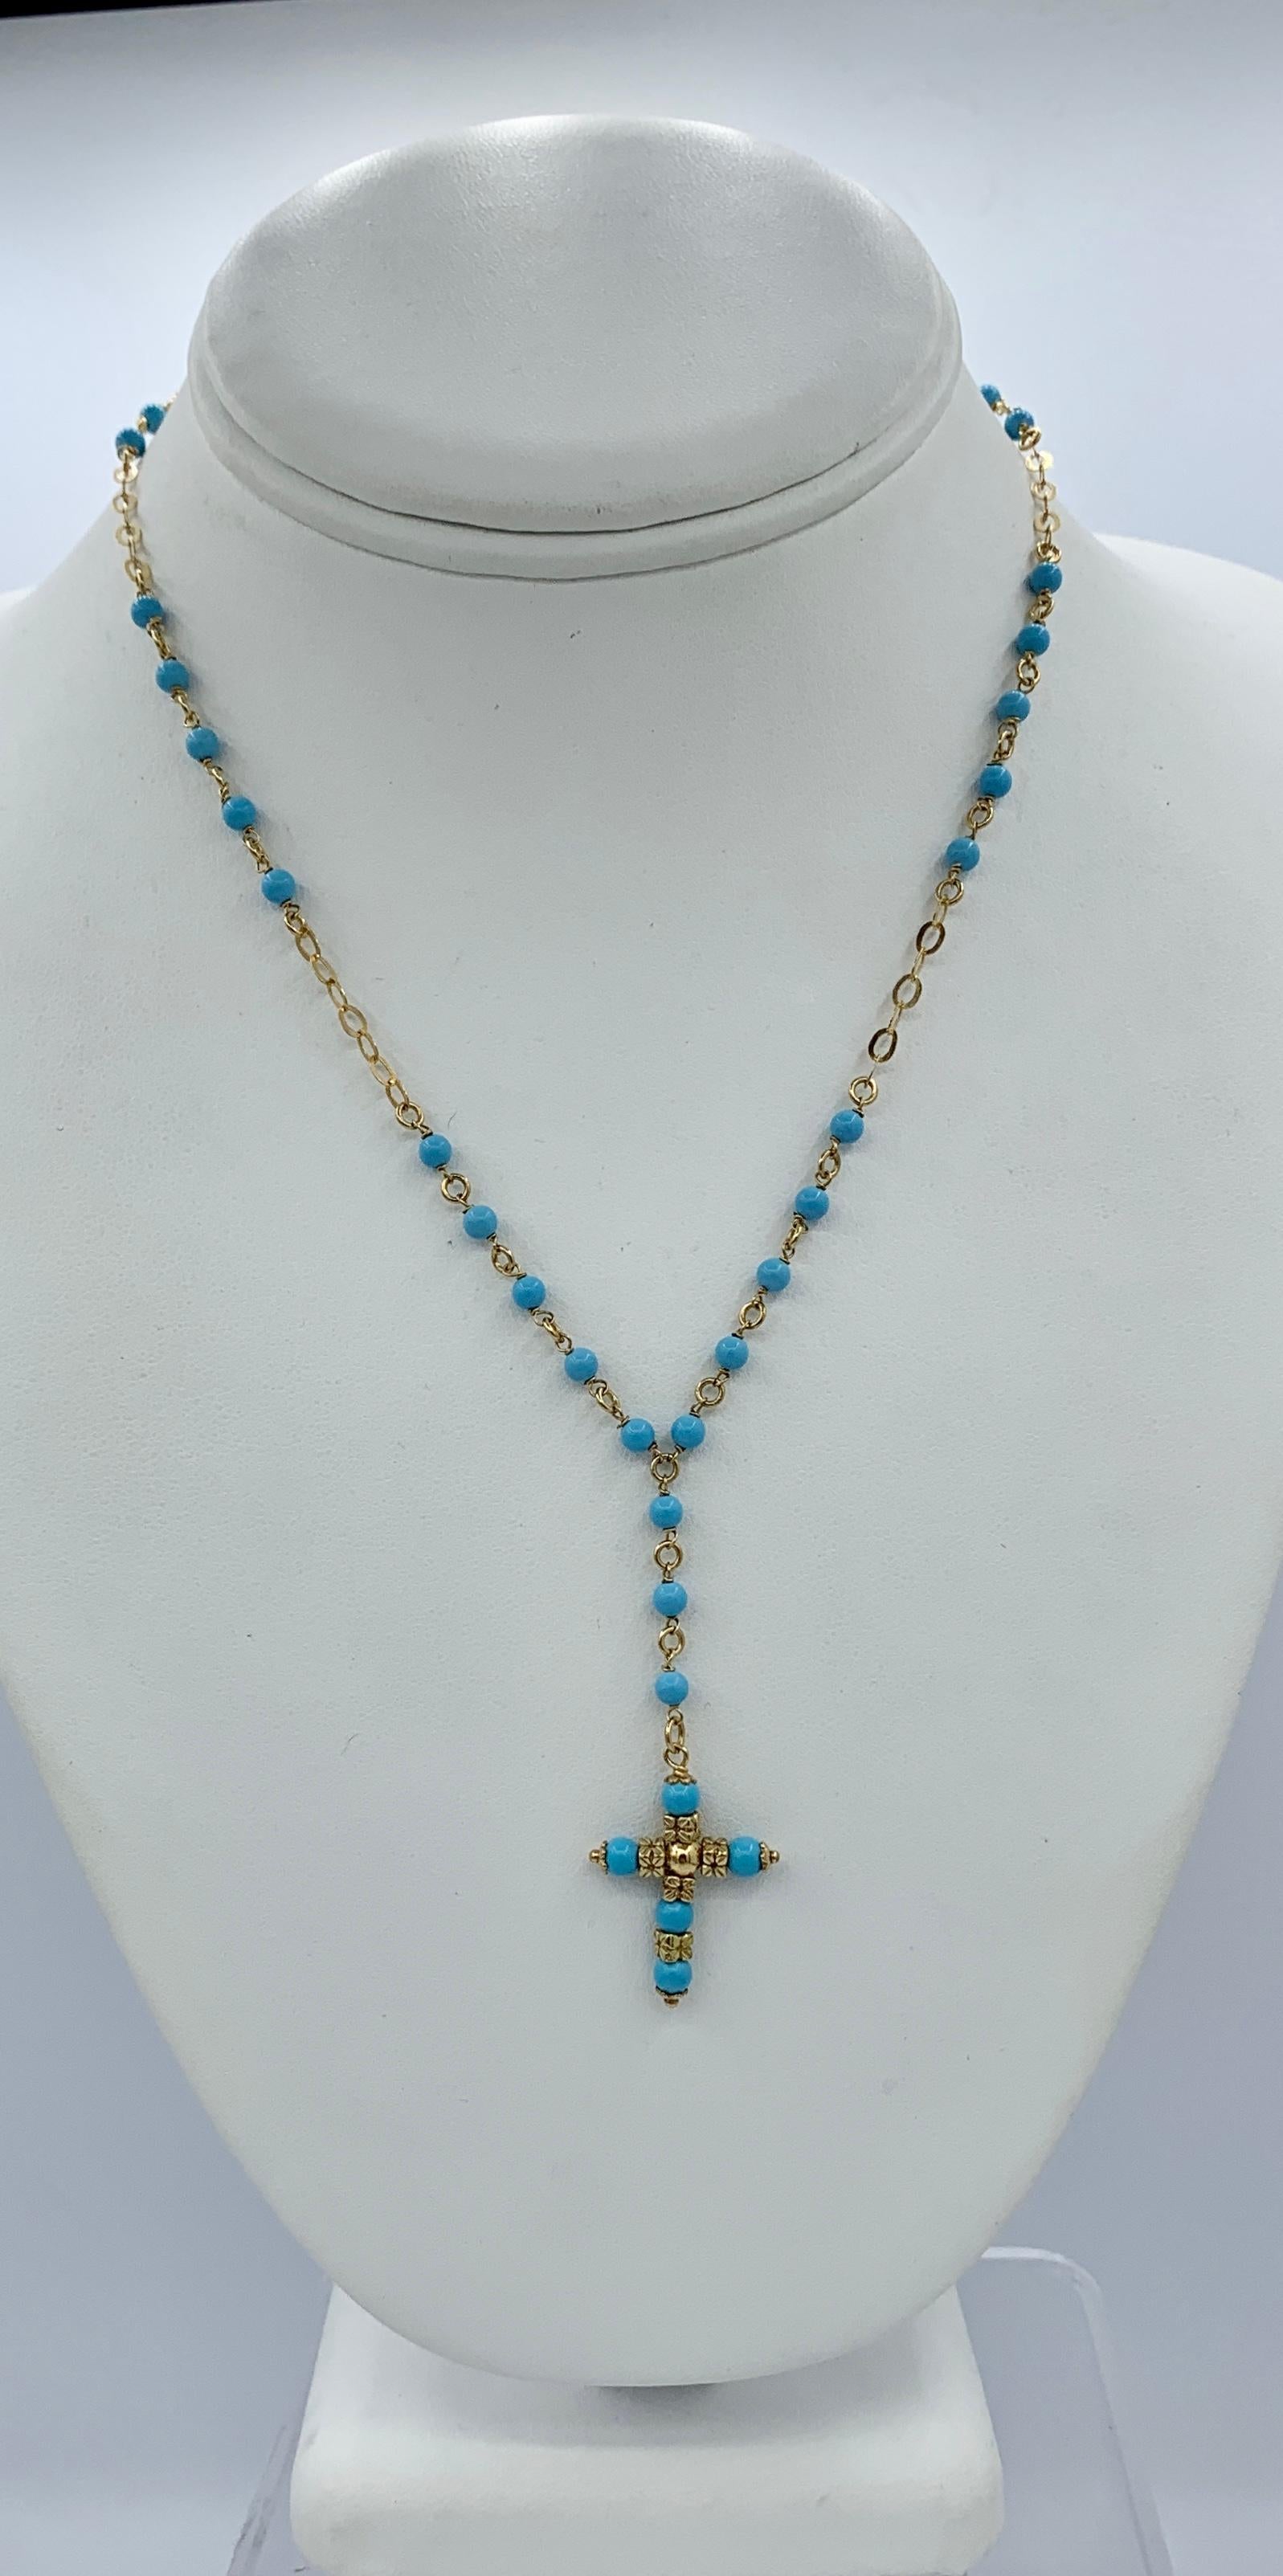 This is a beautiful Persian Turquoise 14 Karat Yellow Gold Cross Pendant Necklace.  The lovely necklace has Persian Turquoise beads interspaced with 14 Karat Yellow Gold links.  In the center is Cross pendant with Persian Turquoise and flower motif